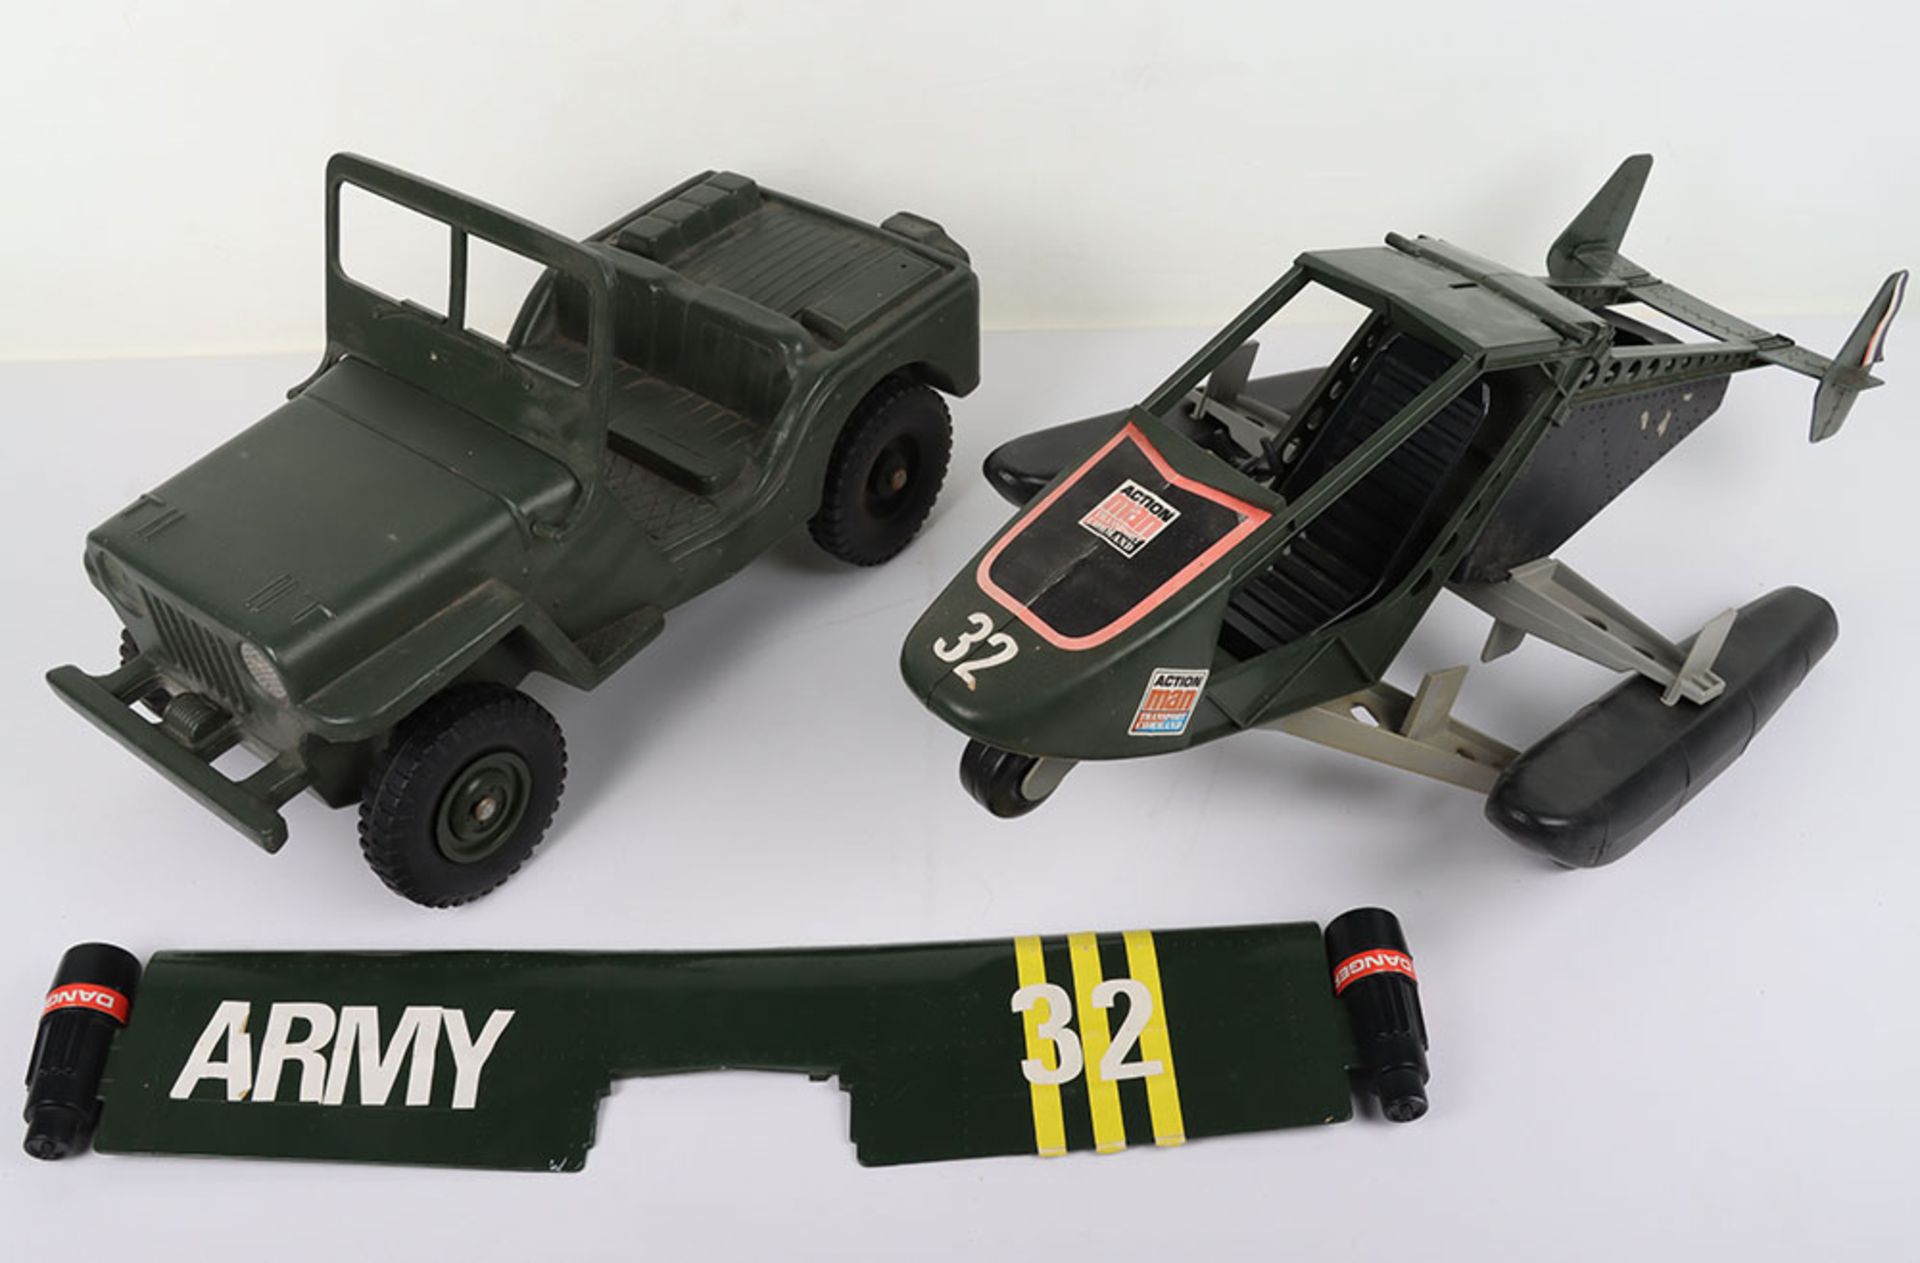 Quantity of Play worn Action man Toy